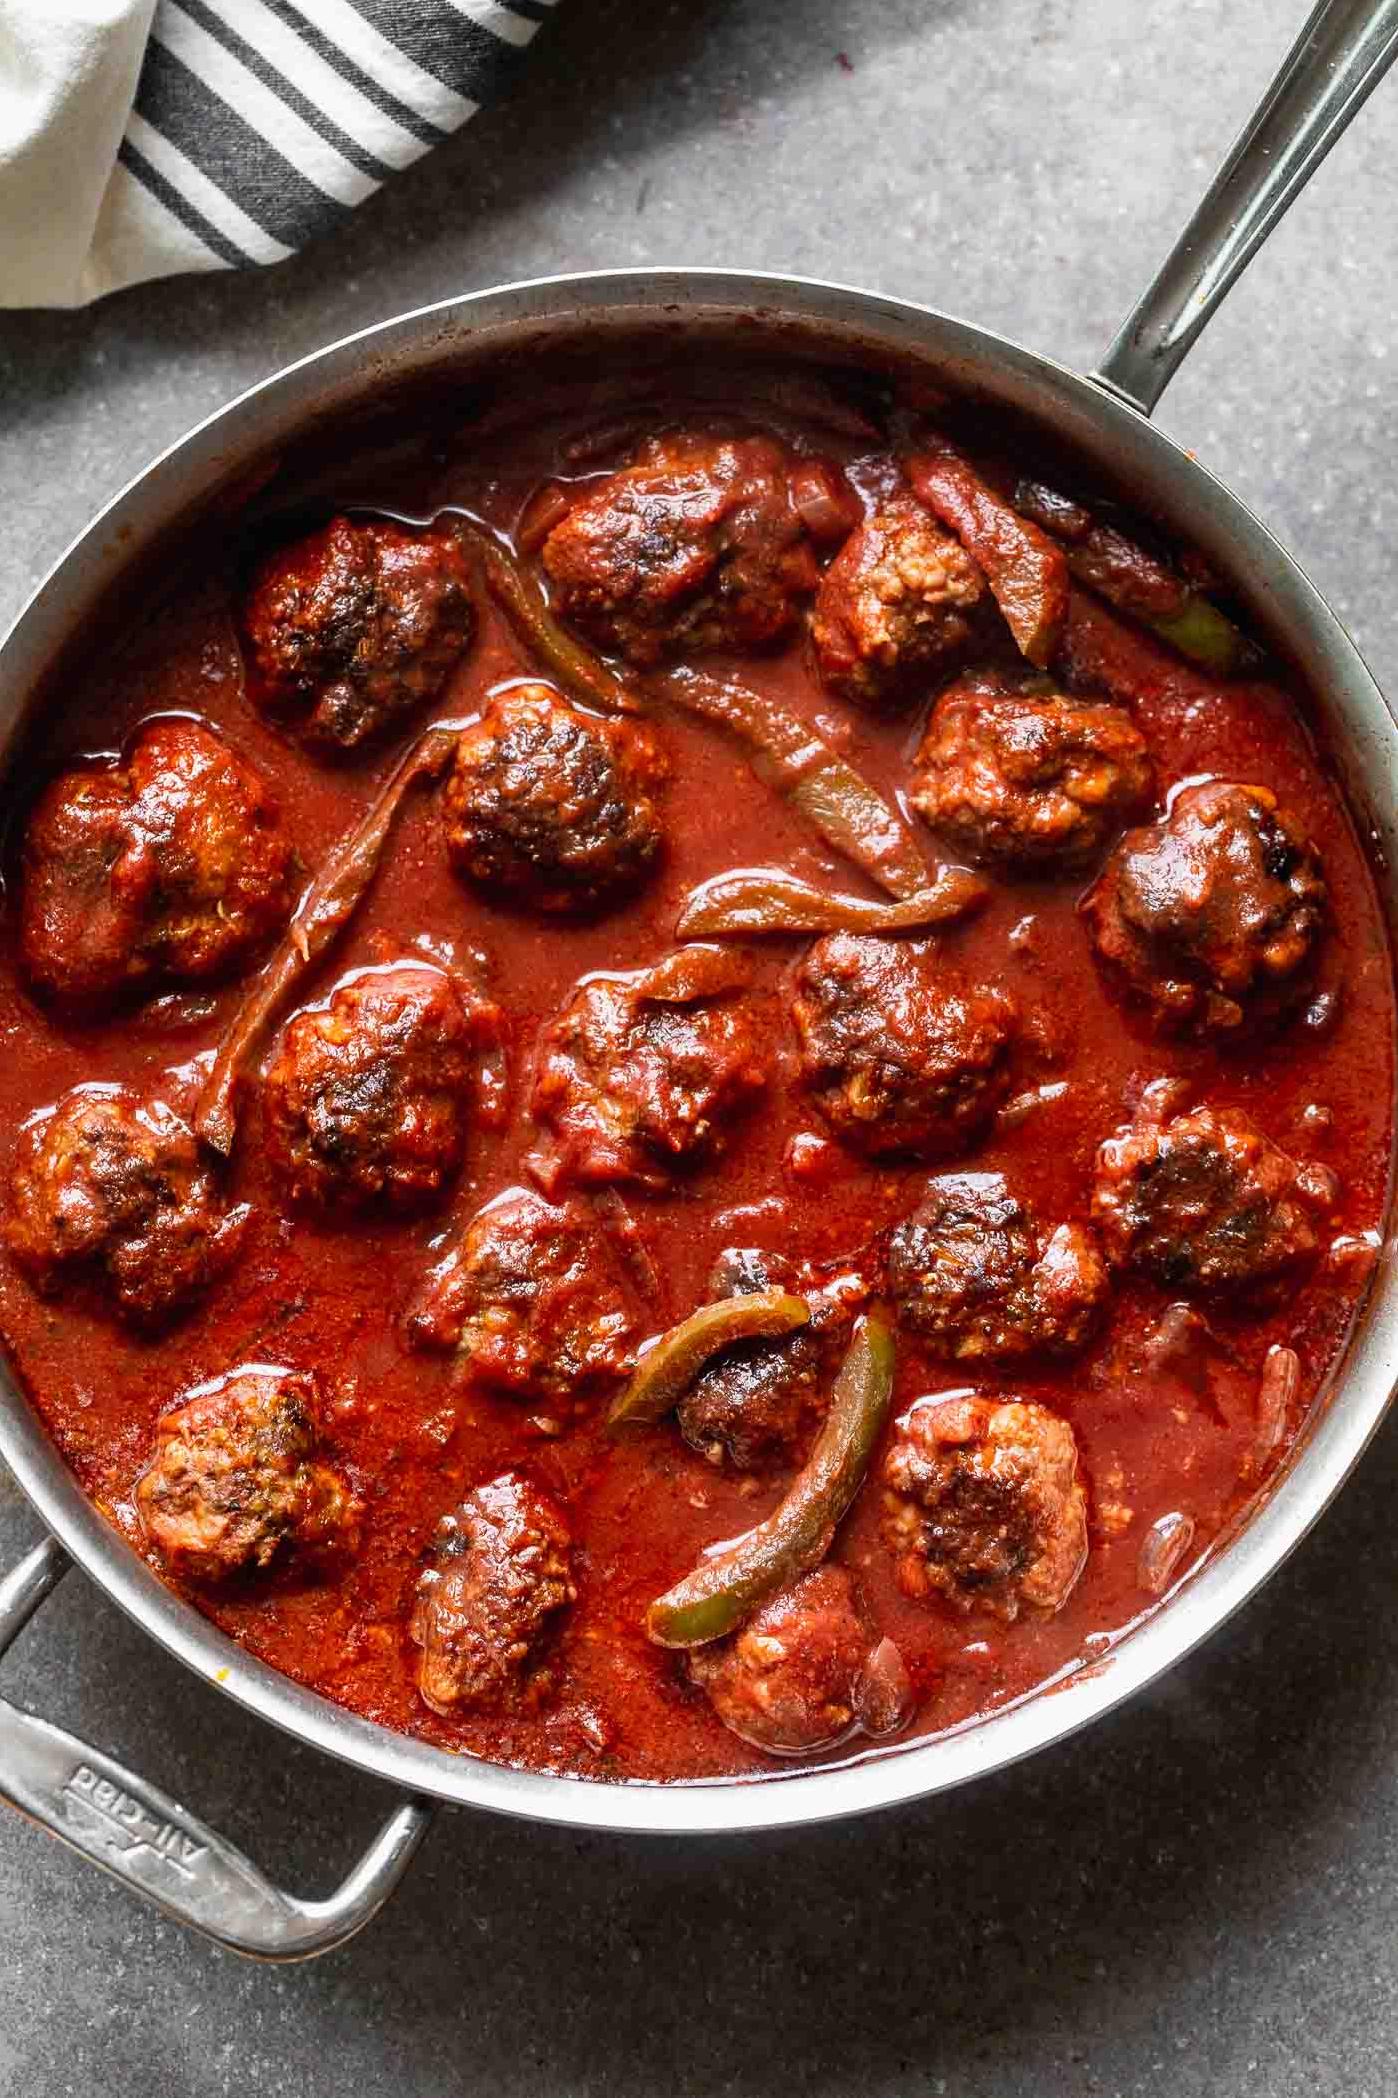  Juicy Meatballs and Spicy Sausage sizzling in Chianti Sauce